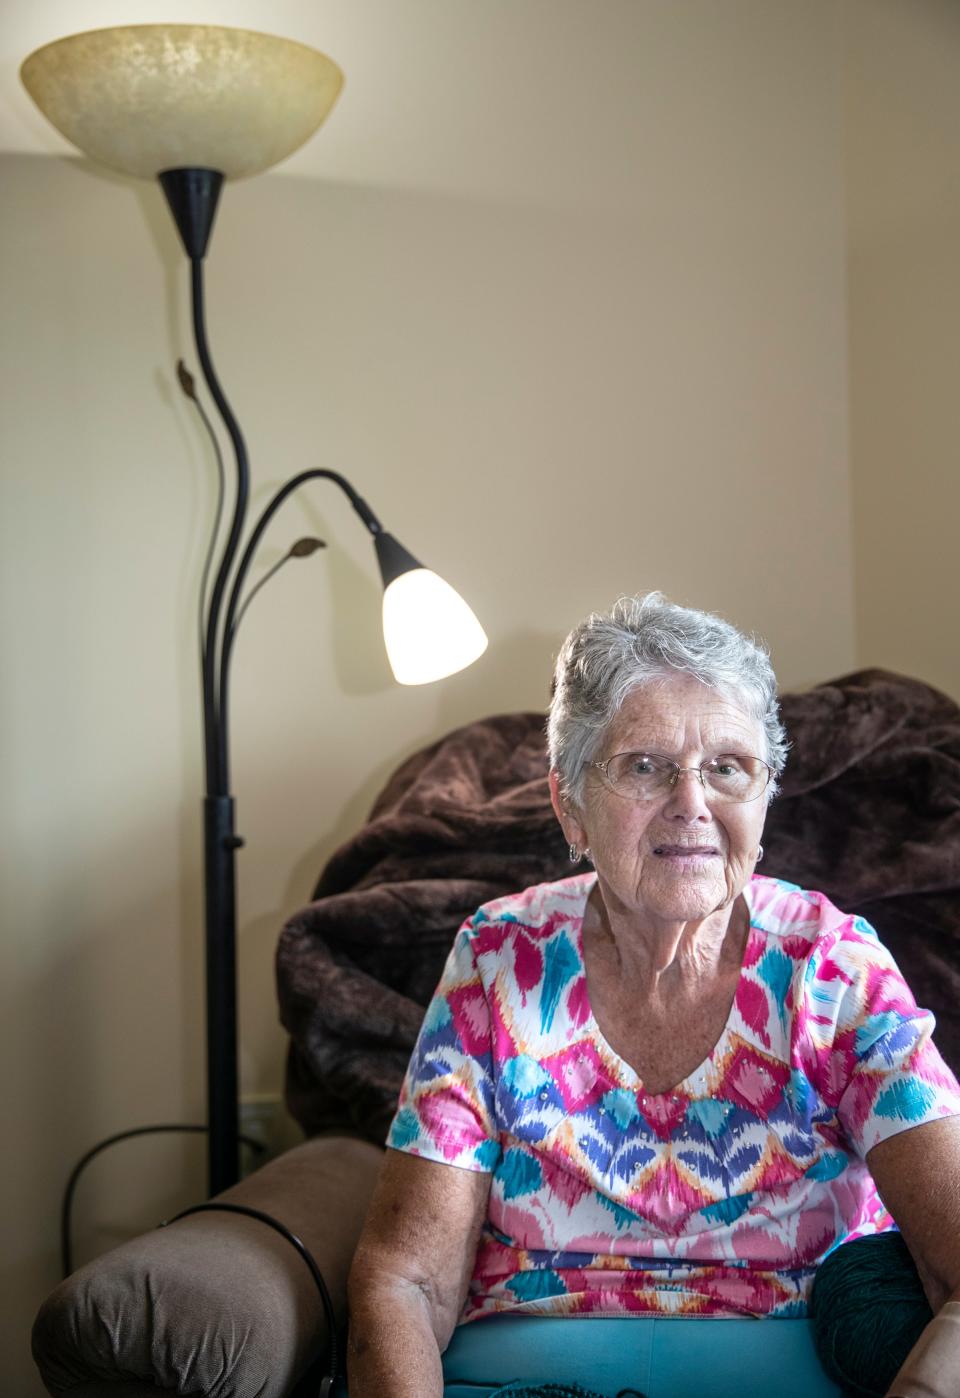 Mary Lou Miller, 82, a resident at Magnolia Springs Senior Living Community, was asked about memories of her father's on Father's Day. May 24, 2022